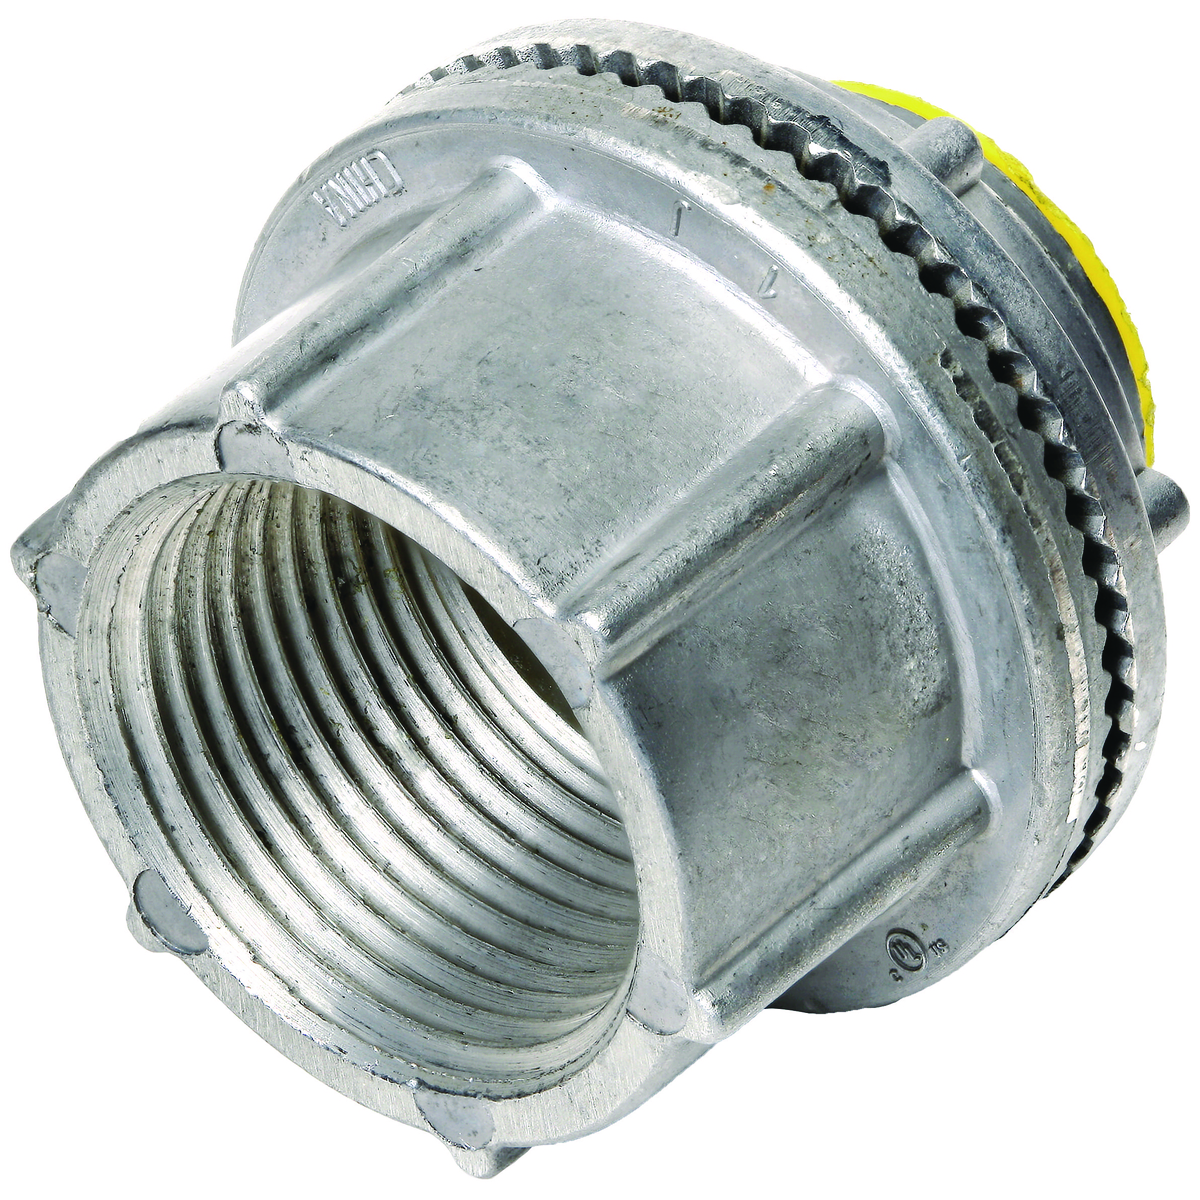 WH SERIES FITTINGS - CONDUIT HUBS - WH WEATHERPROOF CONDUIT HUBS - NPTHUB SIZE 3/4 IN